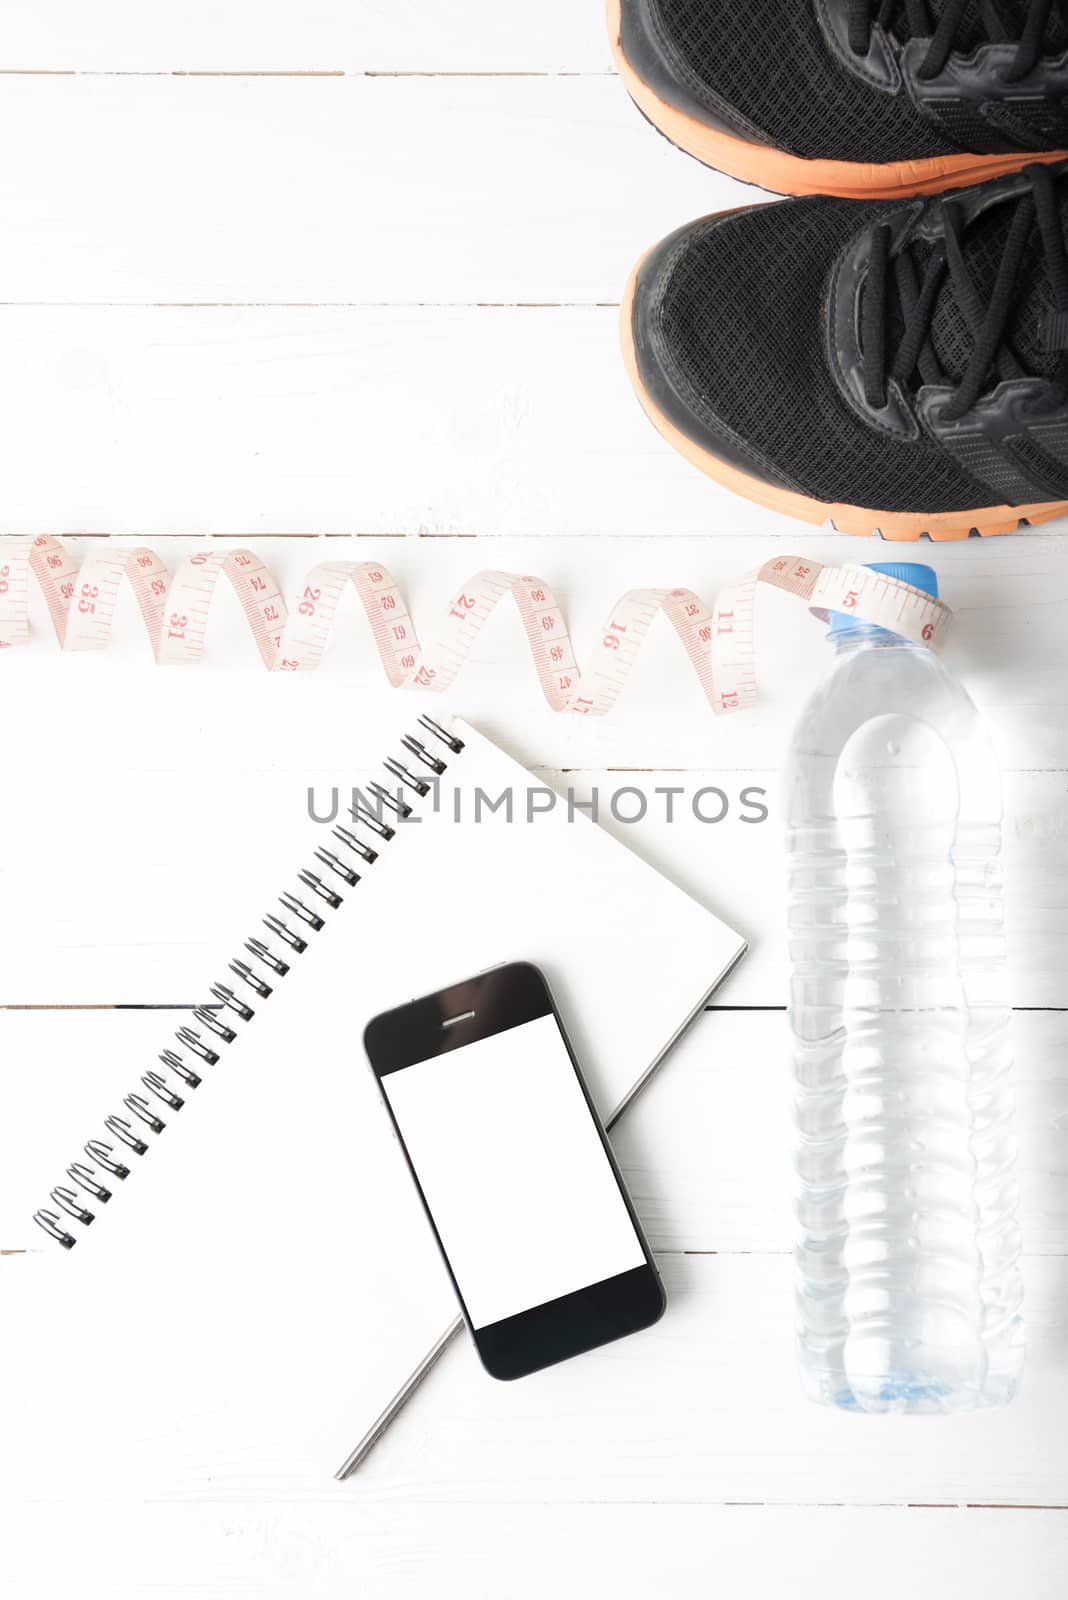 running shoes,measuring tape,drinking water,notebook and phone by ammza12